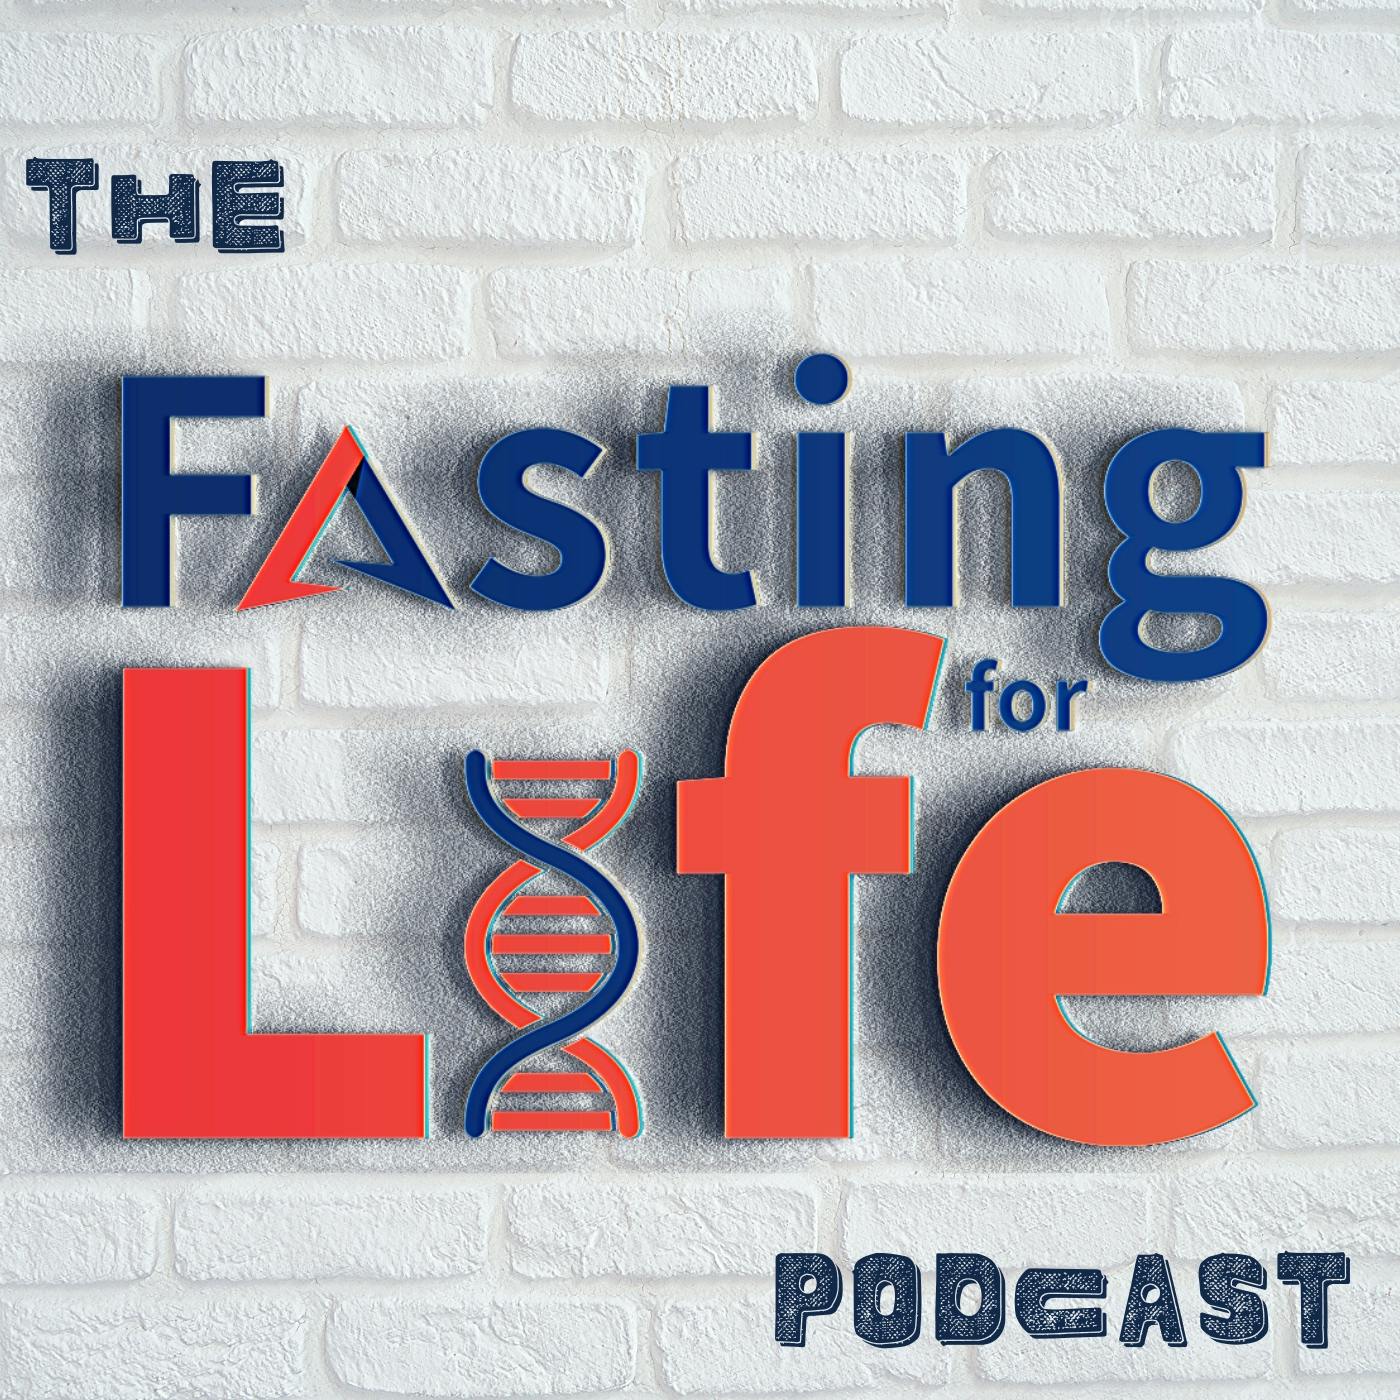 Ep. 161 - Why Sugar, Carbs, and your Liver Matter for your Weight, Body Fat, and Blood Work | How Fasting 16:8 and Reducing Sugar can Improve Fatty Liver (NAFLD), Body Fat, & Triglycerides in just 12 